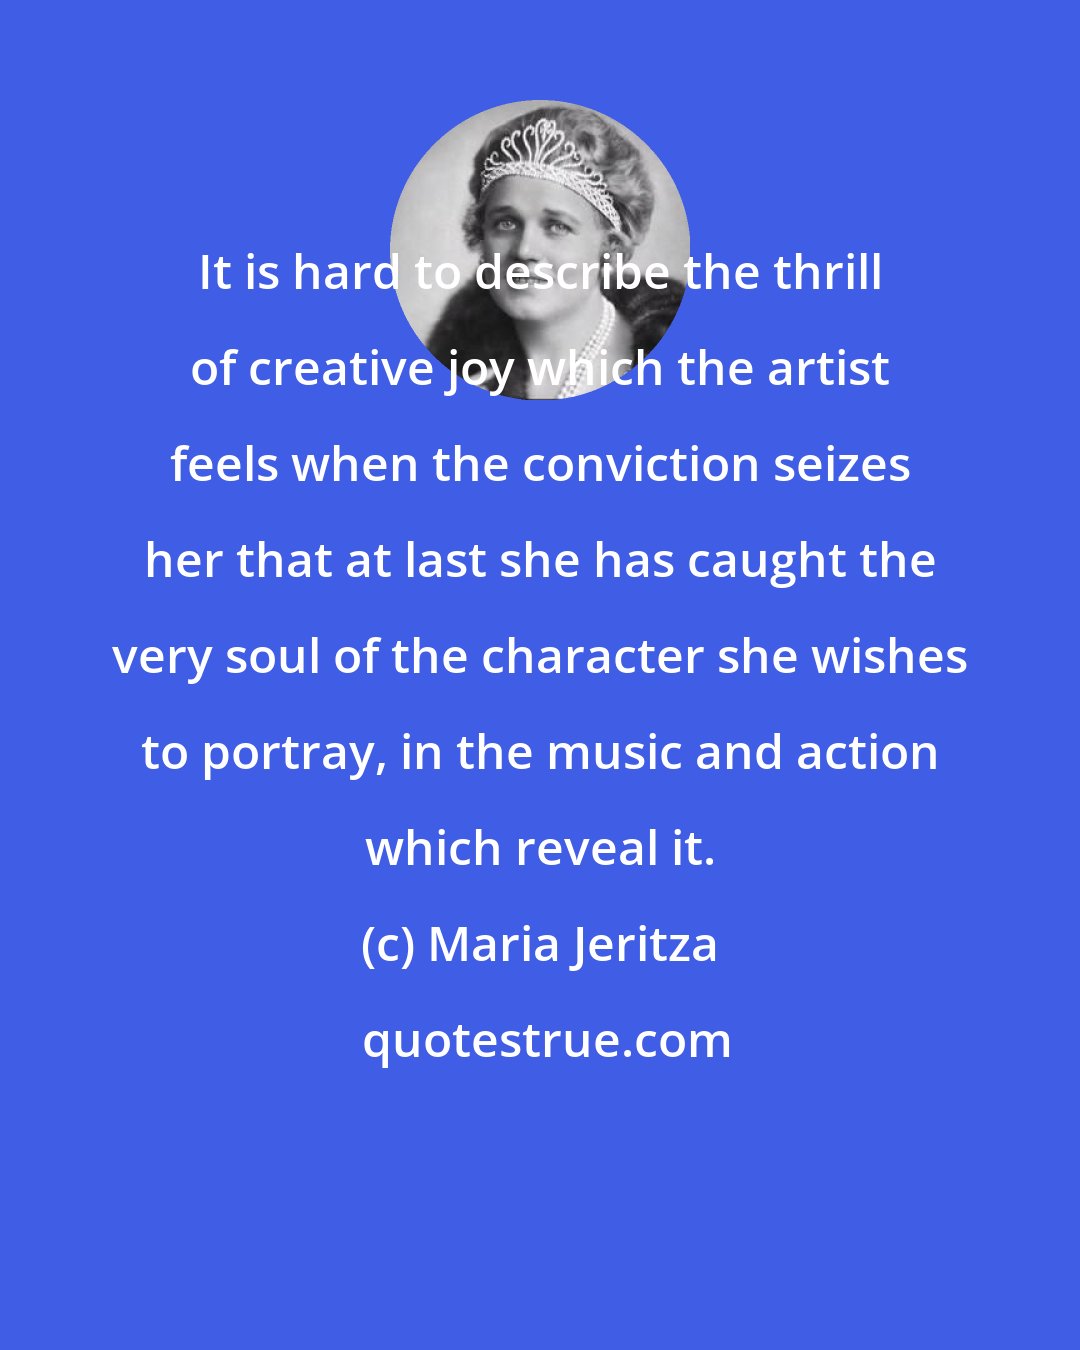 Maria Jeritza: It is hard to describe the thrill of creative joy which the artist feels when the conviction seizes her that at last she has caught the very soul of the character she wishes to portray, in the music and action which reveal it.